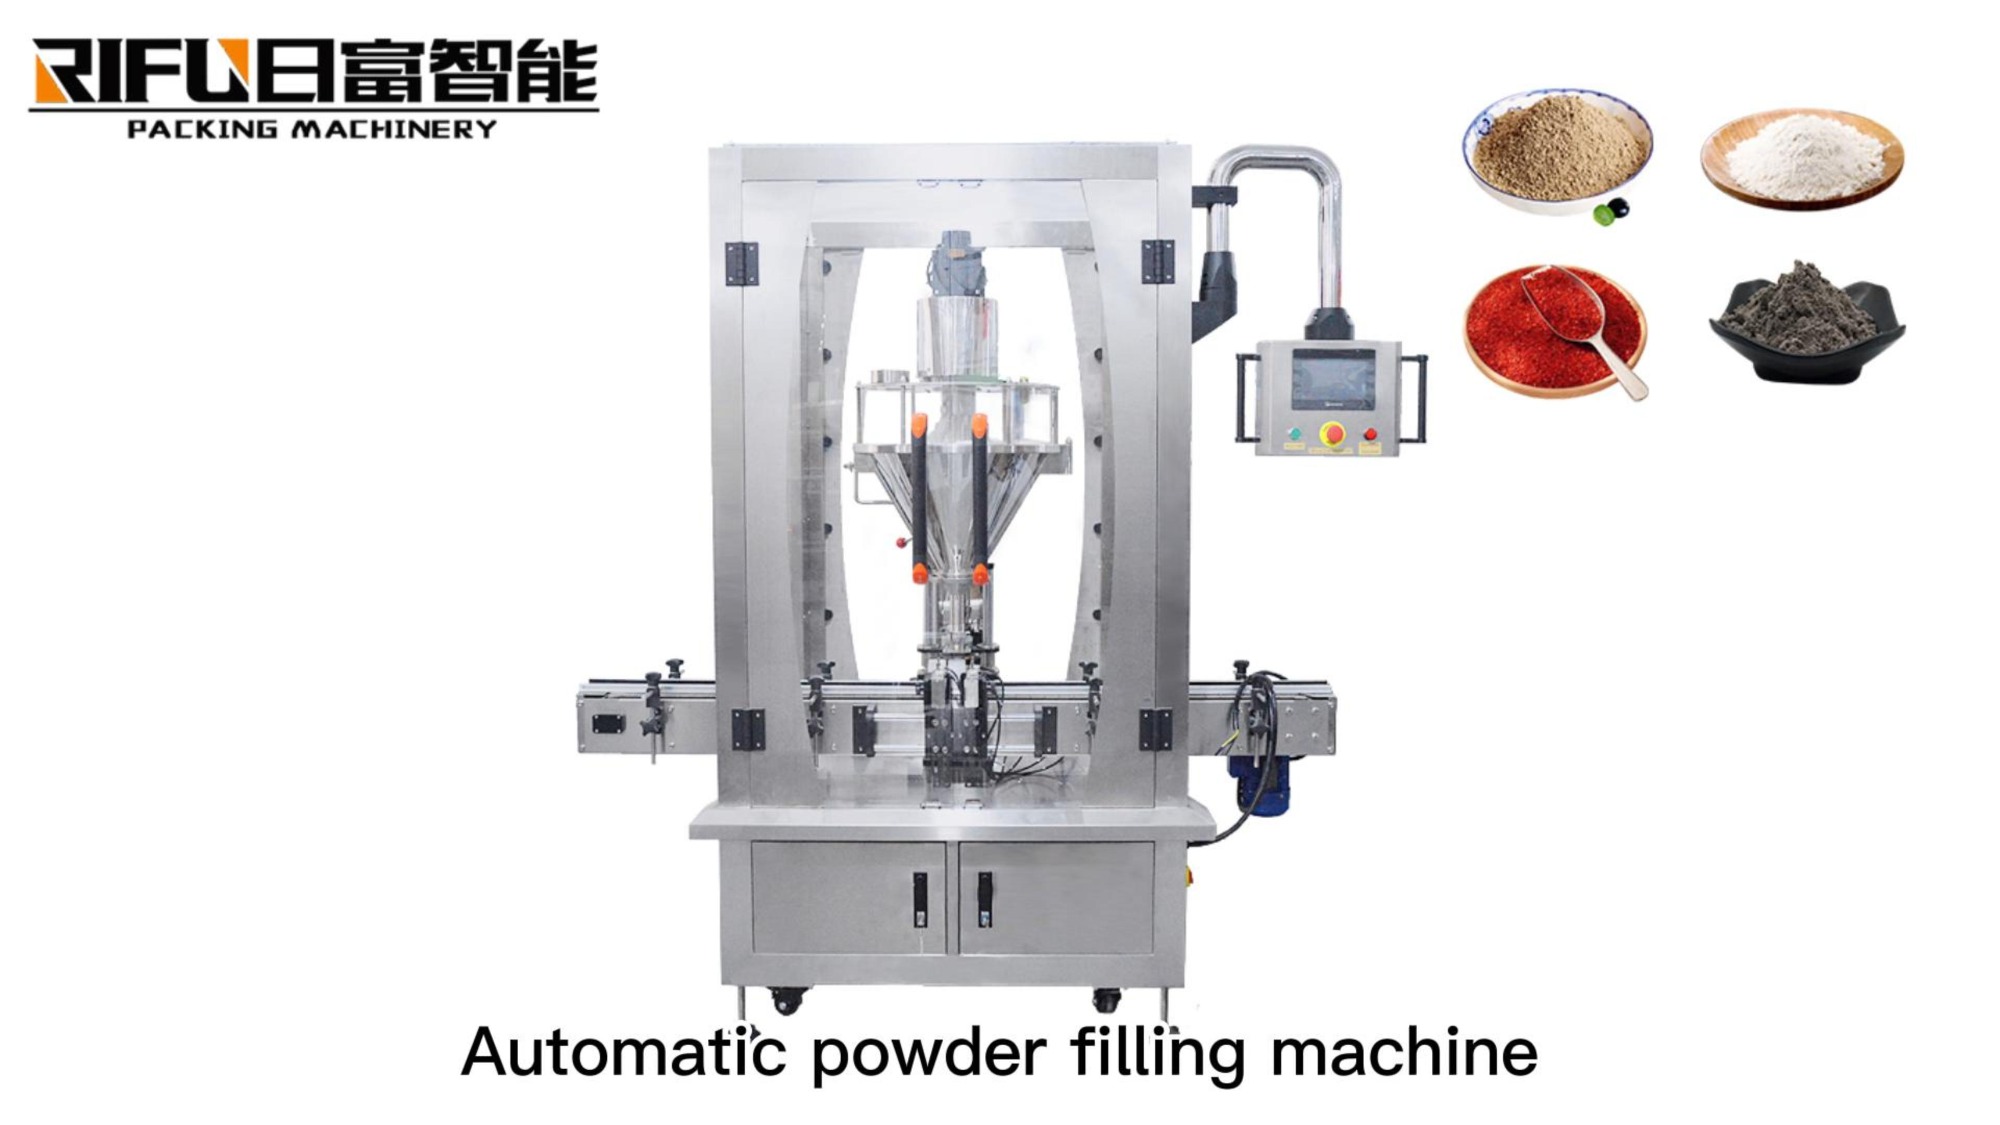 The second test of powder filling machine